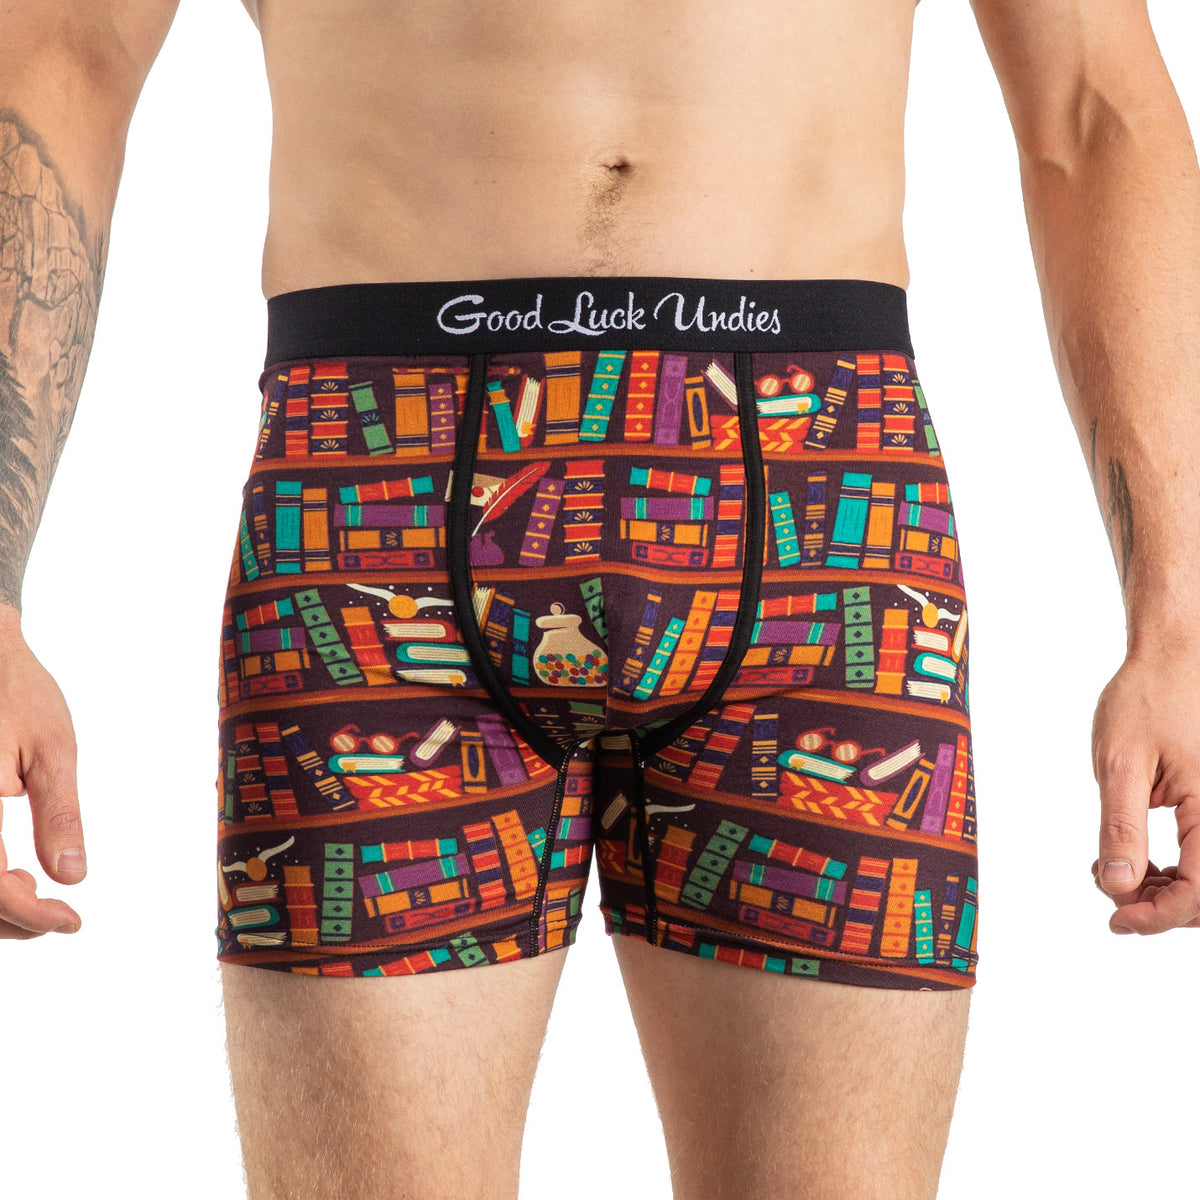 Men's Underwears For Every Ocassion